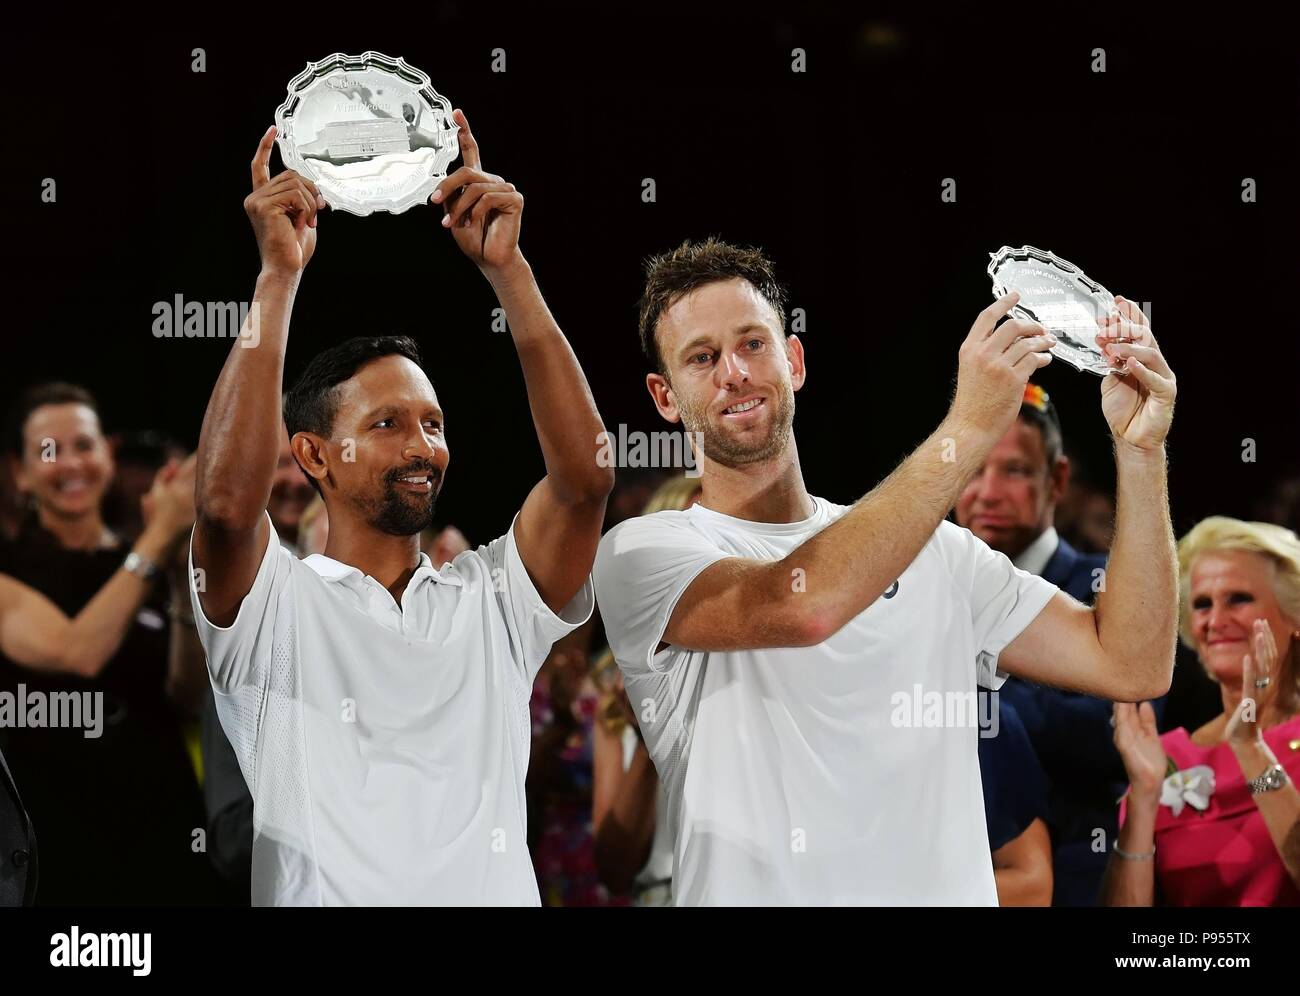 London, Britain. 14th July, 2018. Michael Venus (R) of New Zealand and Raven Klaasen of South Africa show their trophies after the Gentlemen's Doubles Final against Mike Bryan and Jack Sock of the United States at the Wimbledon Championships 2018 in London, Britain, on July 14, 2018. Michael Venus and Raven Klaasen lost 2-3 and won the second place of the event. Credit: Guo Qiuda/Xinhua/Alamy Live News Stock Photo